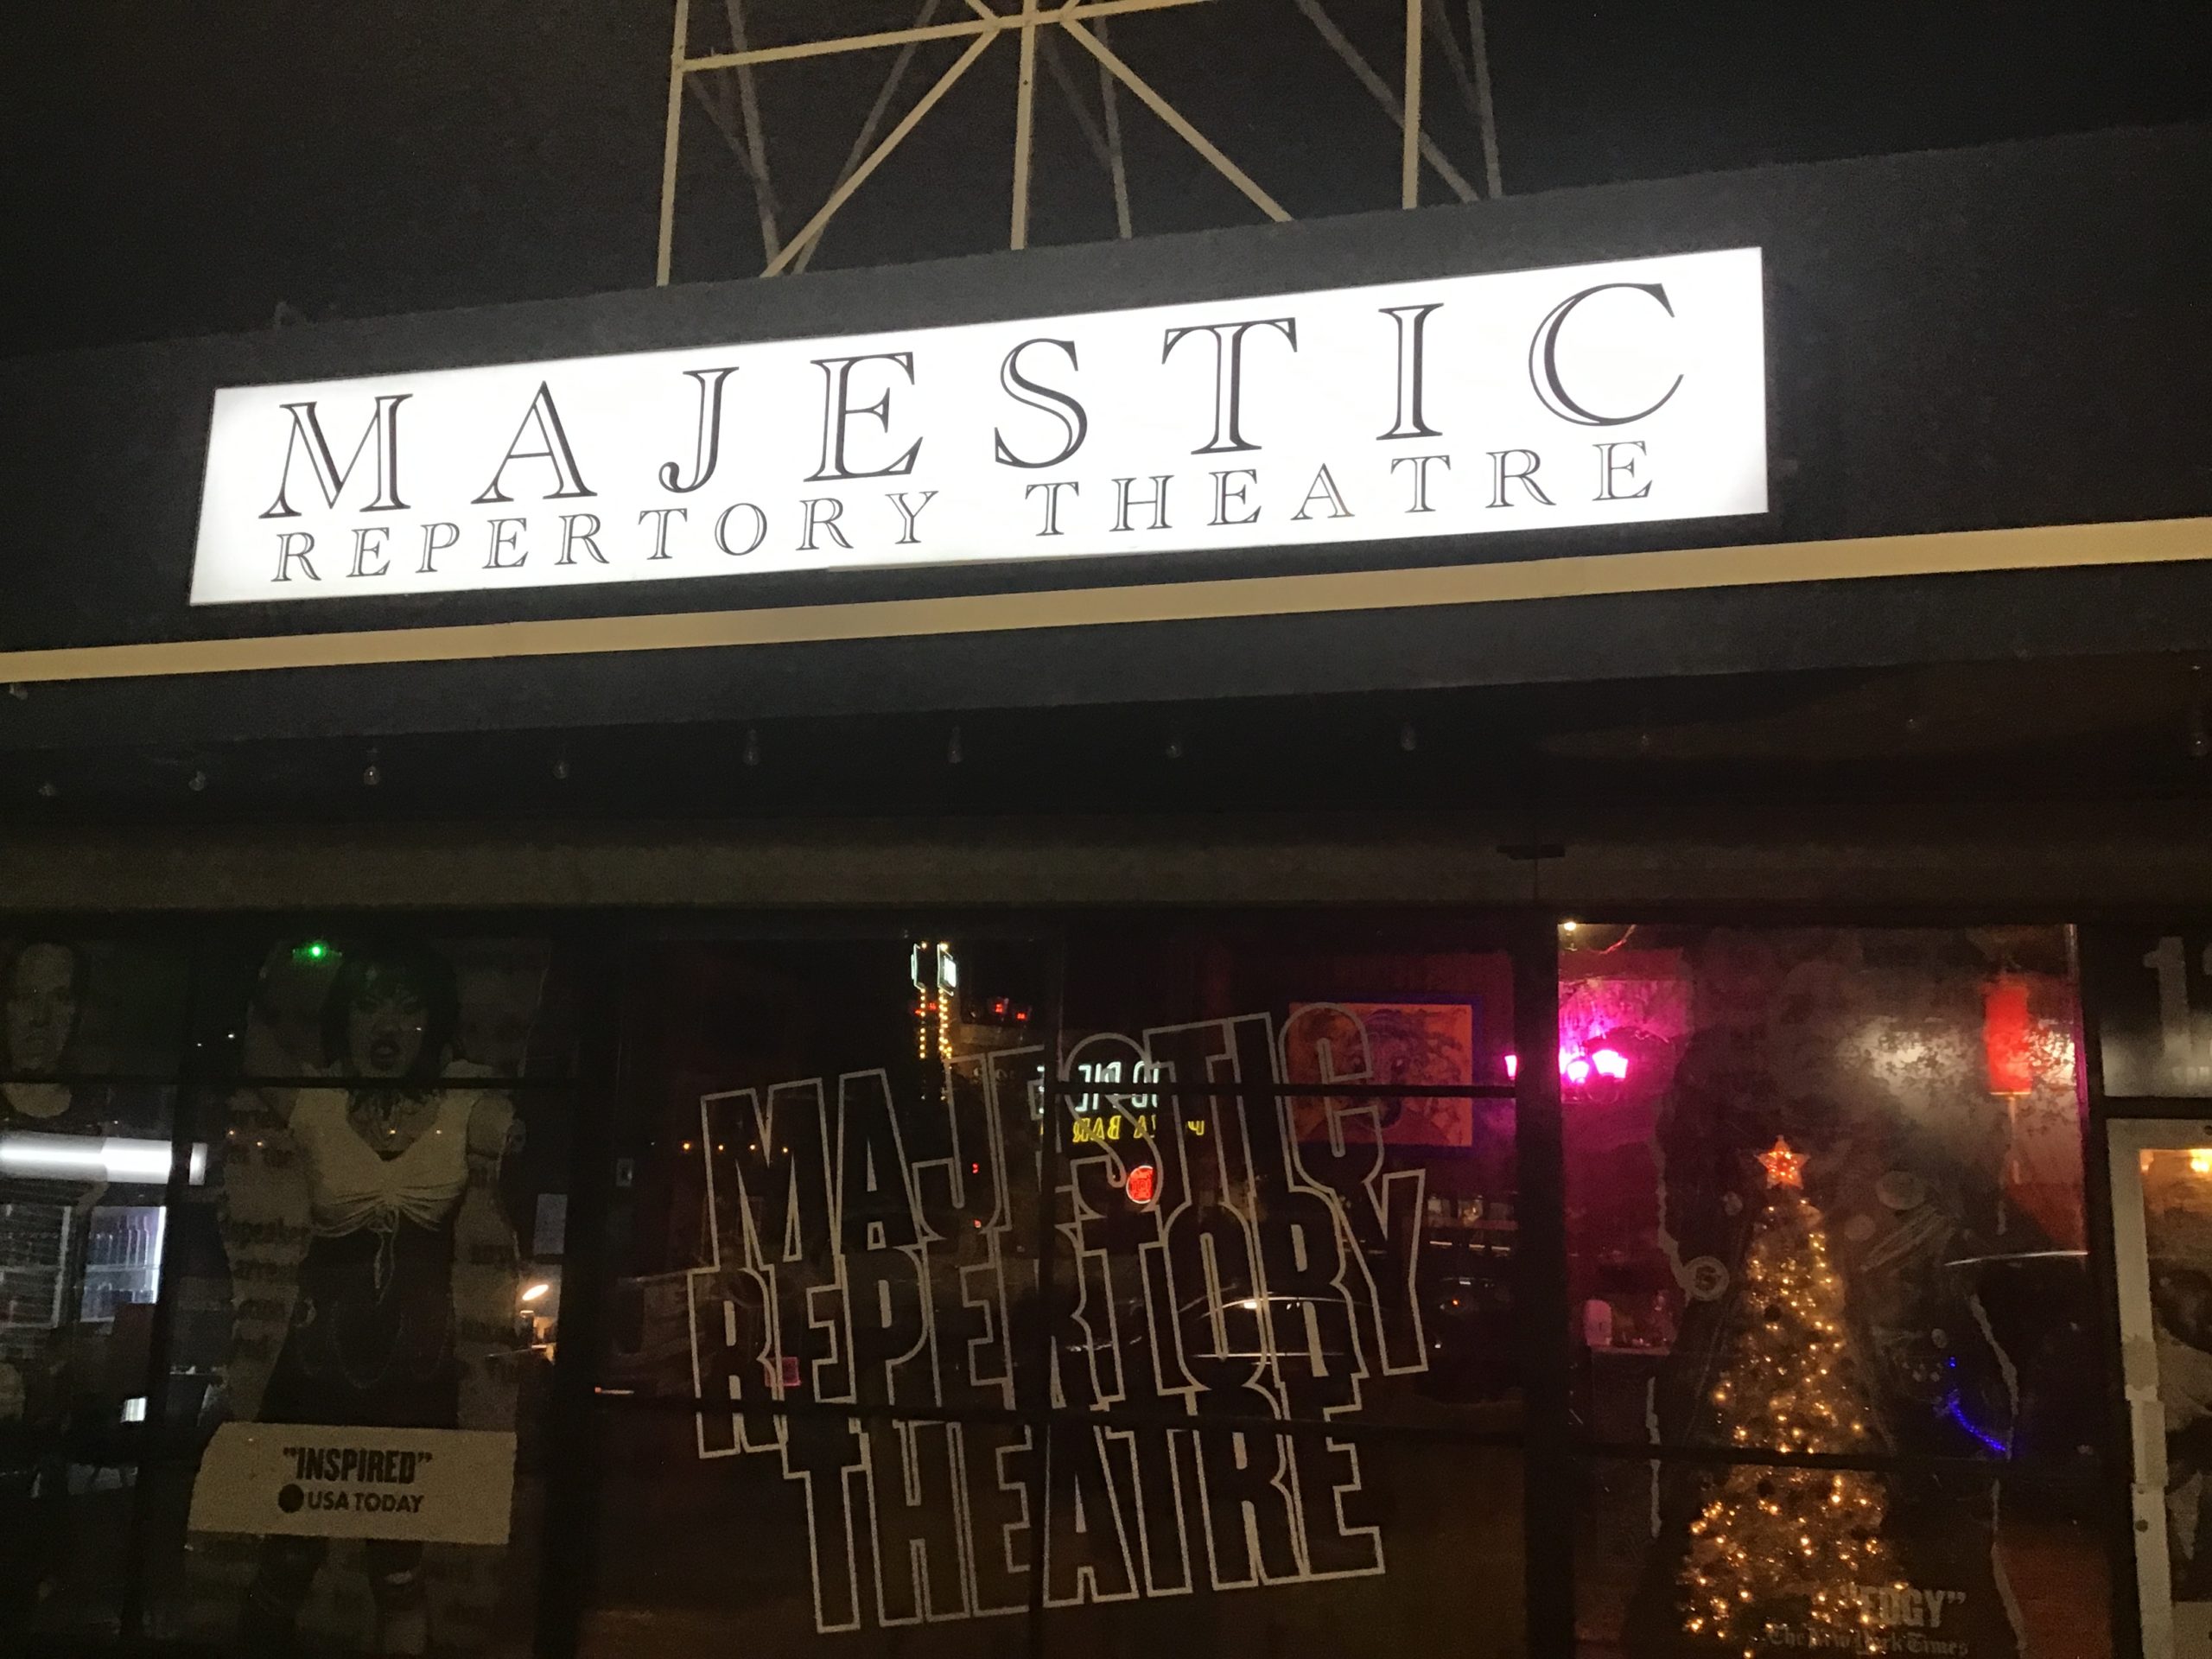 The Majestic Theater